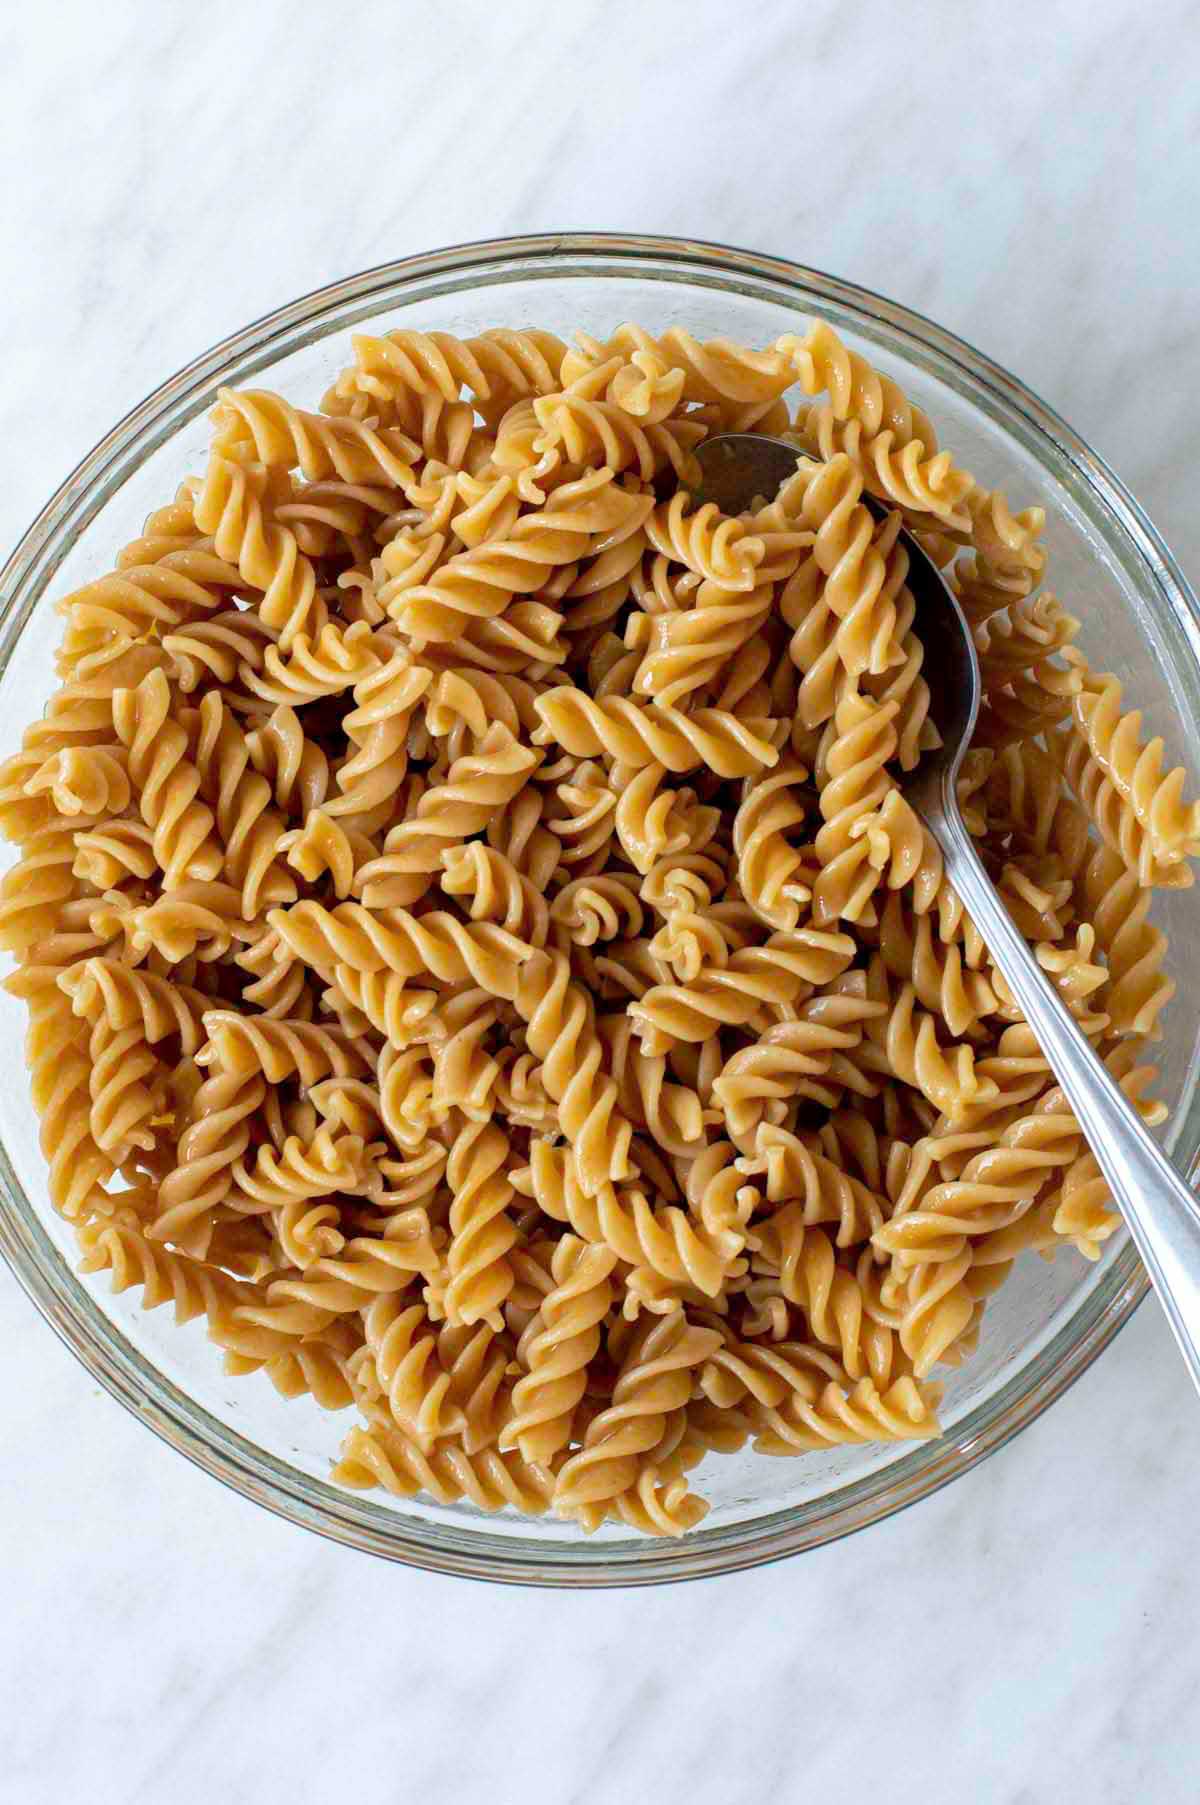 Cooked whole wheat fusilli coated with olive oil in a glass bowl.